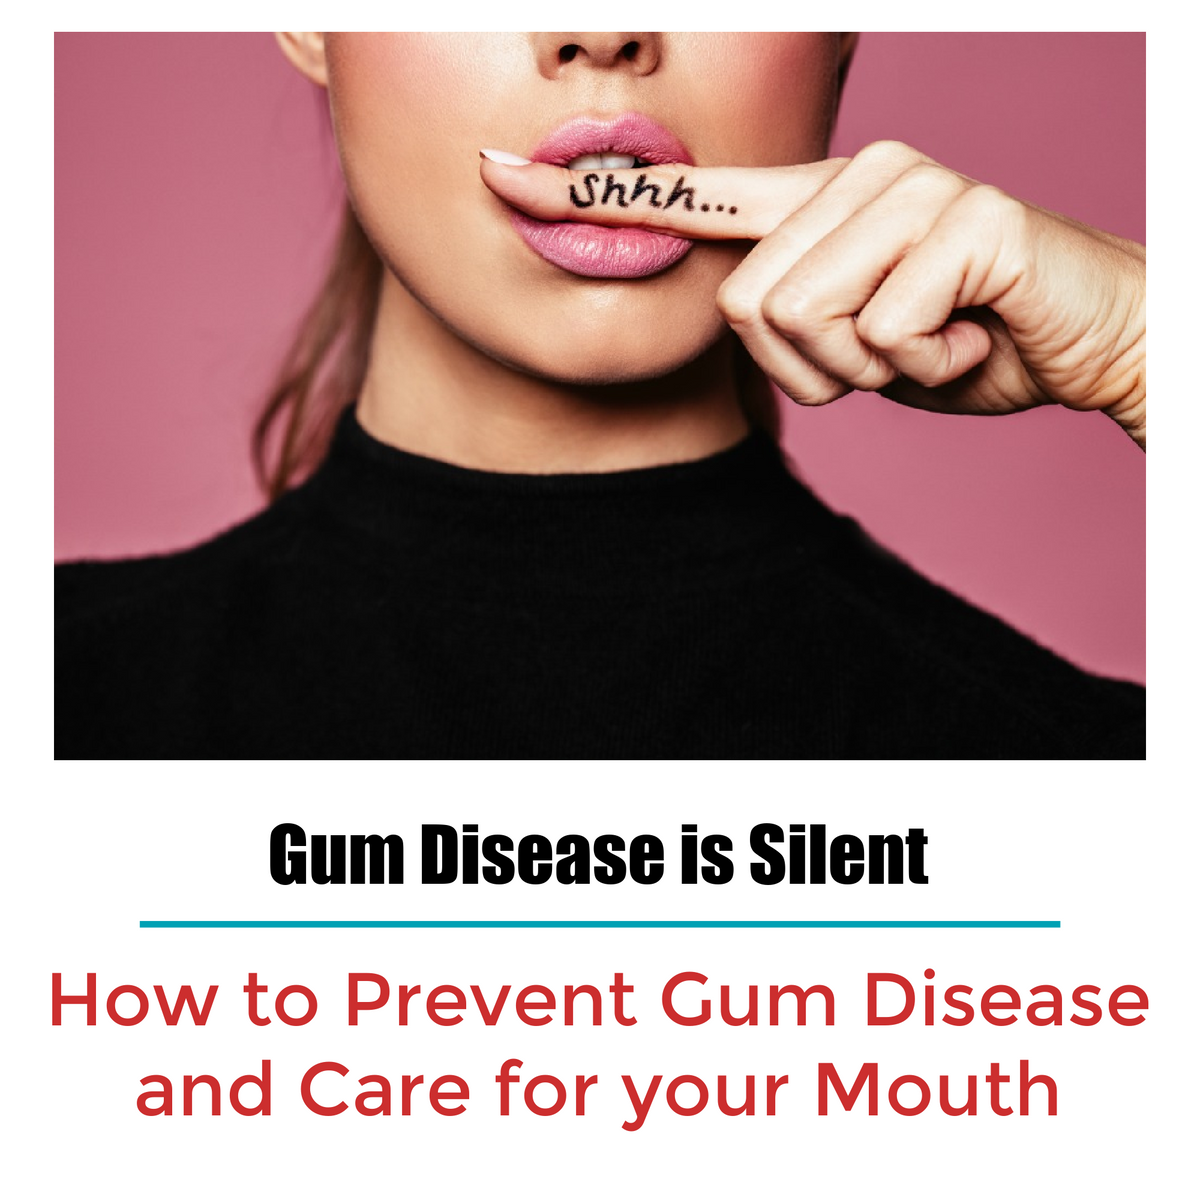 ebook about gum disease and oral health written by a dental hygienist